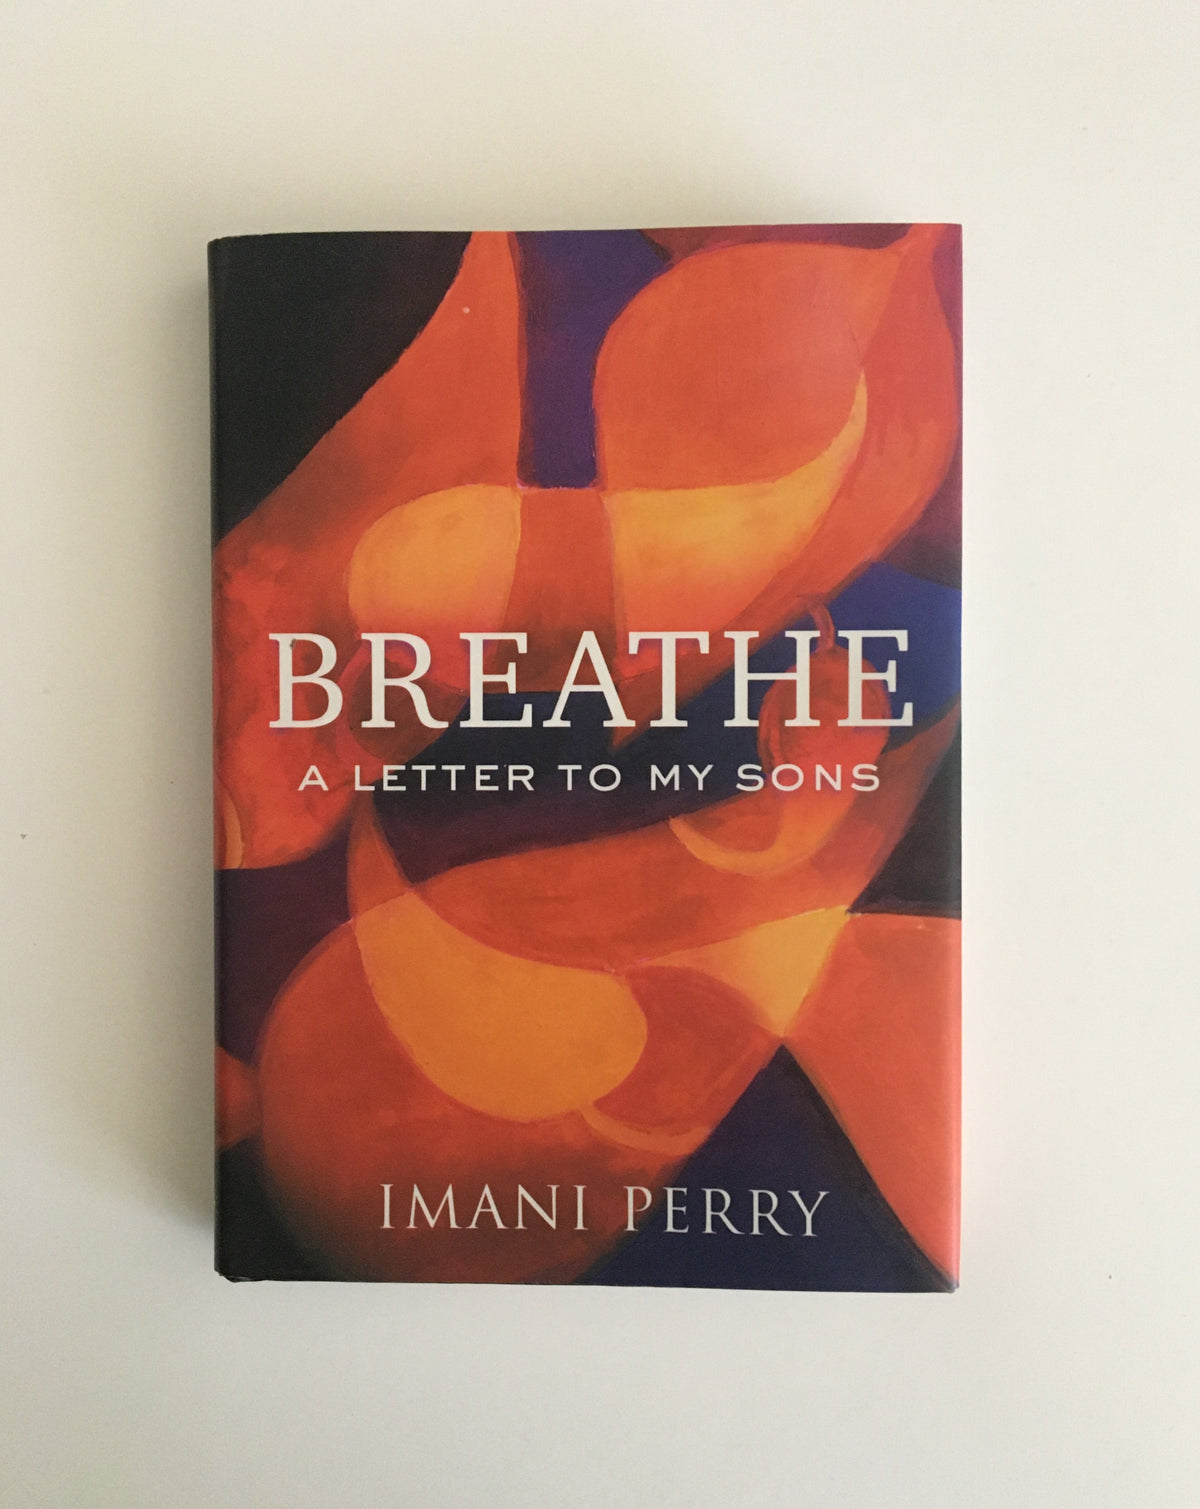 Breathe: A Letter to my Sons by Imani Perry